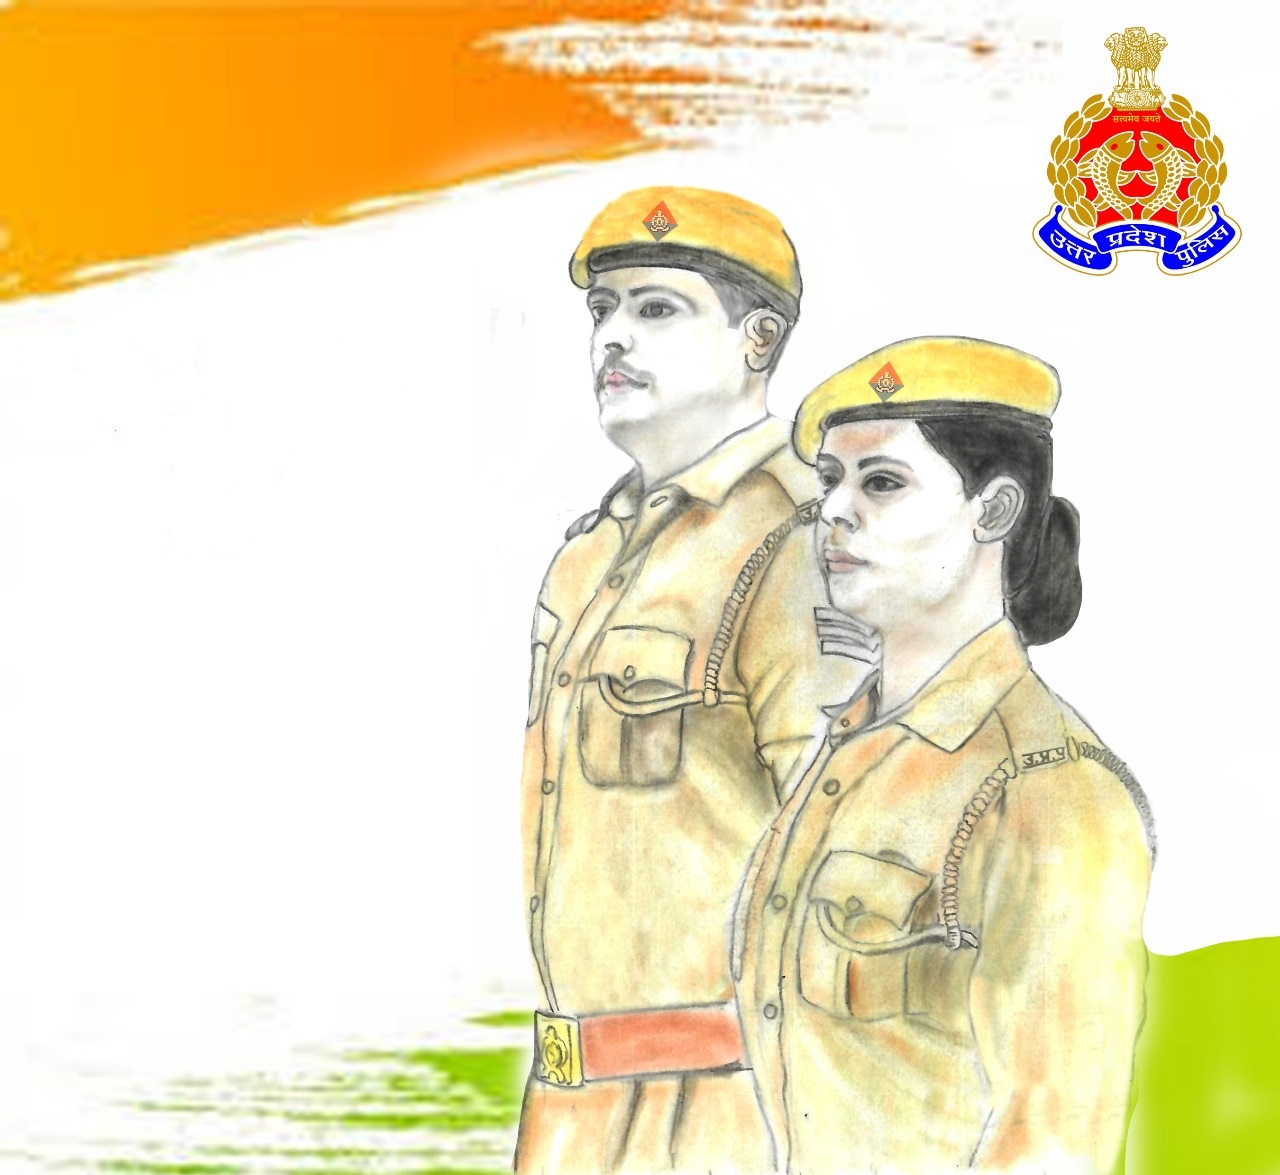 Indian Police Officer Front View Vector Illustration